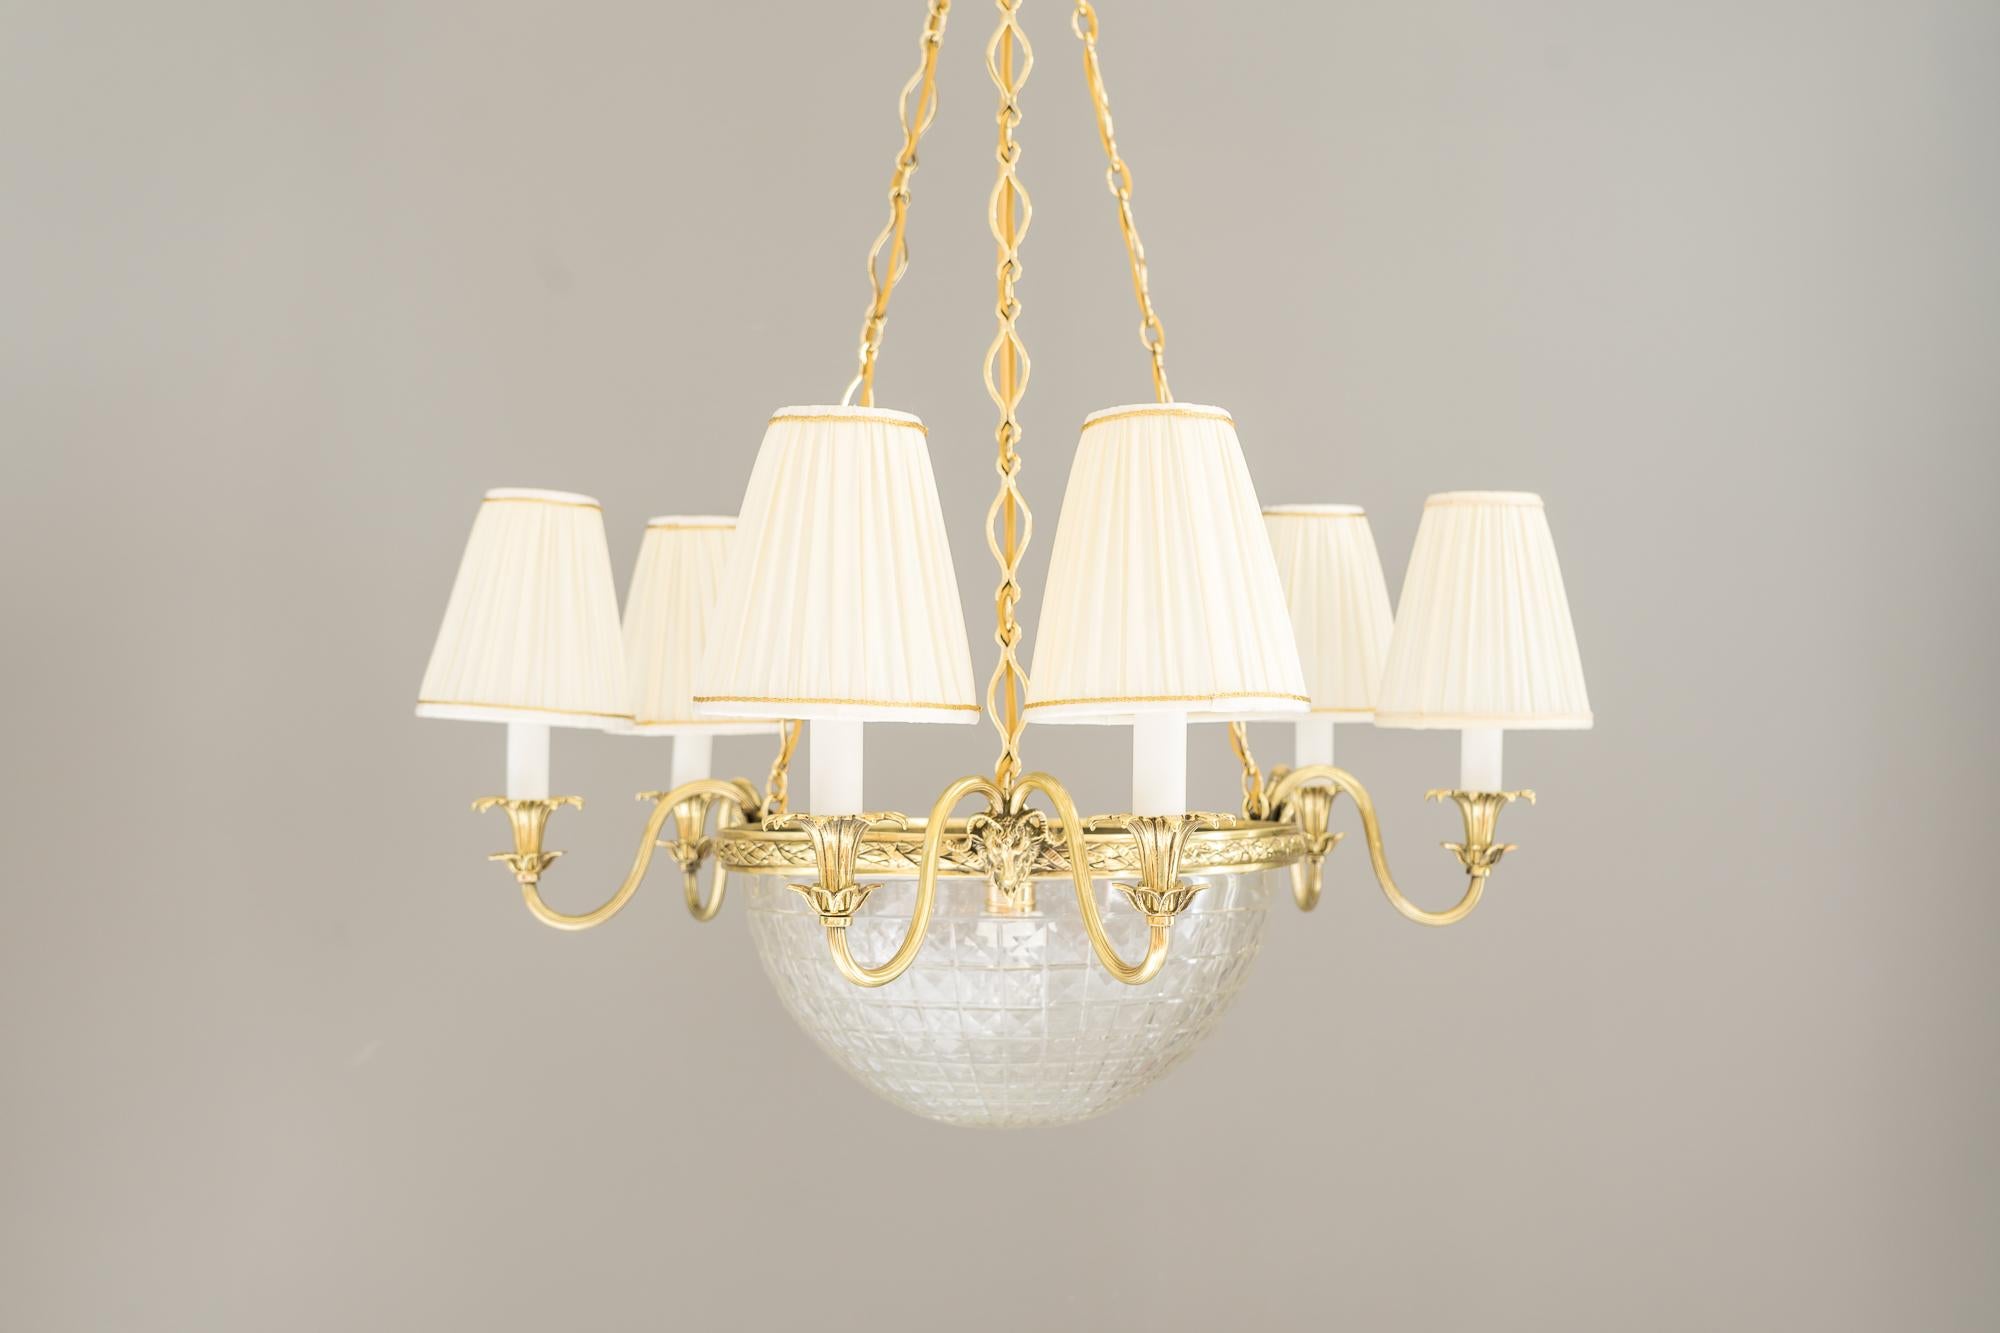 Historistic brass chandelier, Vienna, 1890s
Polished and stove enameled
Cut glass
The fabric shades are replaced (new).